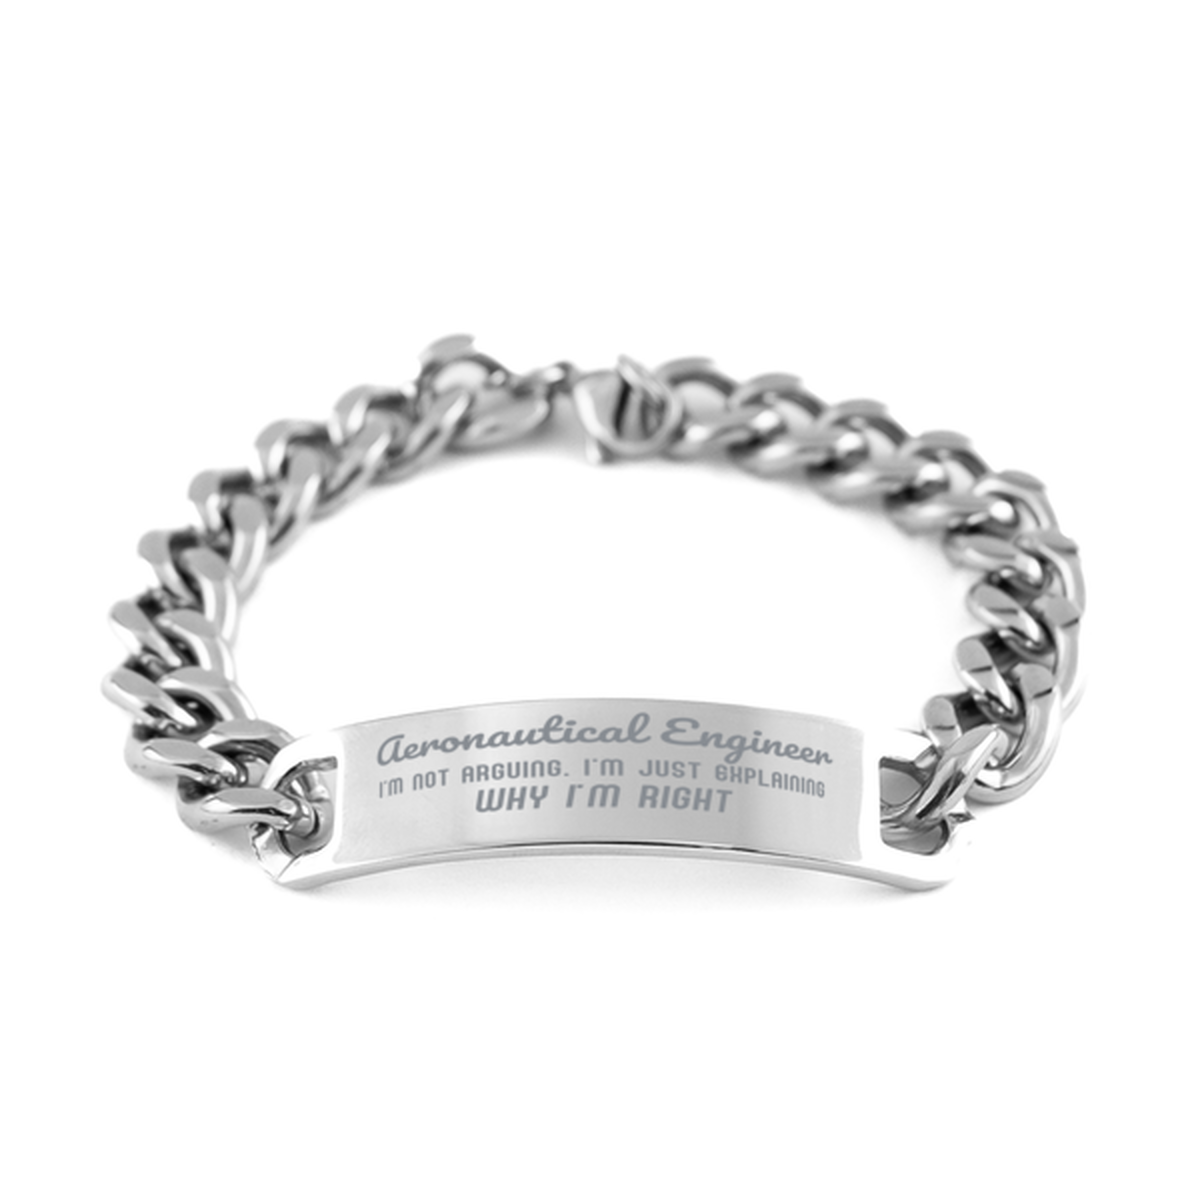 Aeronautical Engineer I'm not Arguing. I'm Just Explaining Why I'm RIGHT Cuban Chain Stainless Steel Bracelet, Graduation Birthday Christmas Aeronautical Engineer Gifts For Aeronautical Engineer Funny Saying Quote Present for Men Women Coworker